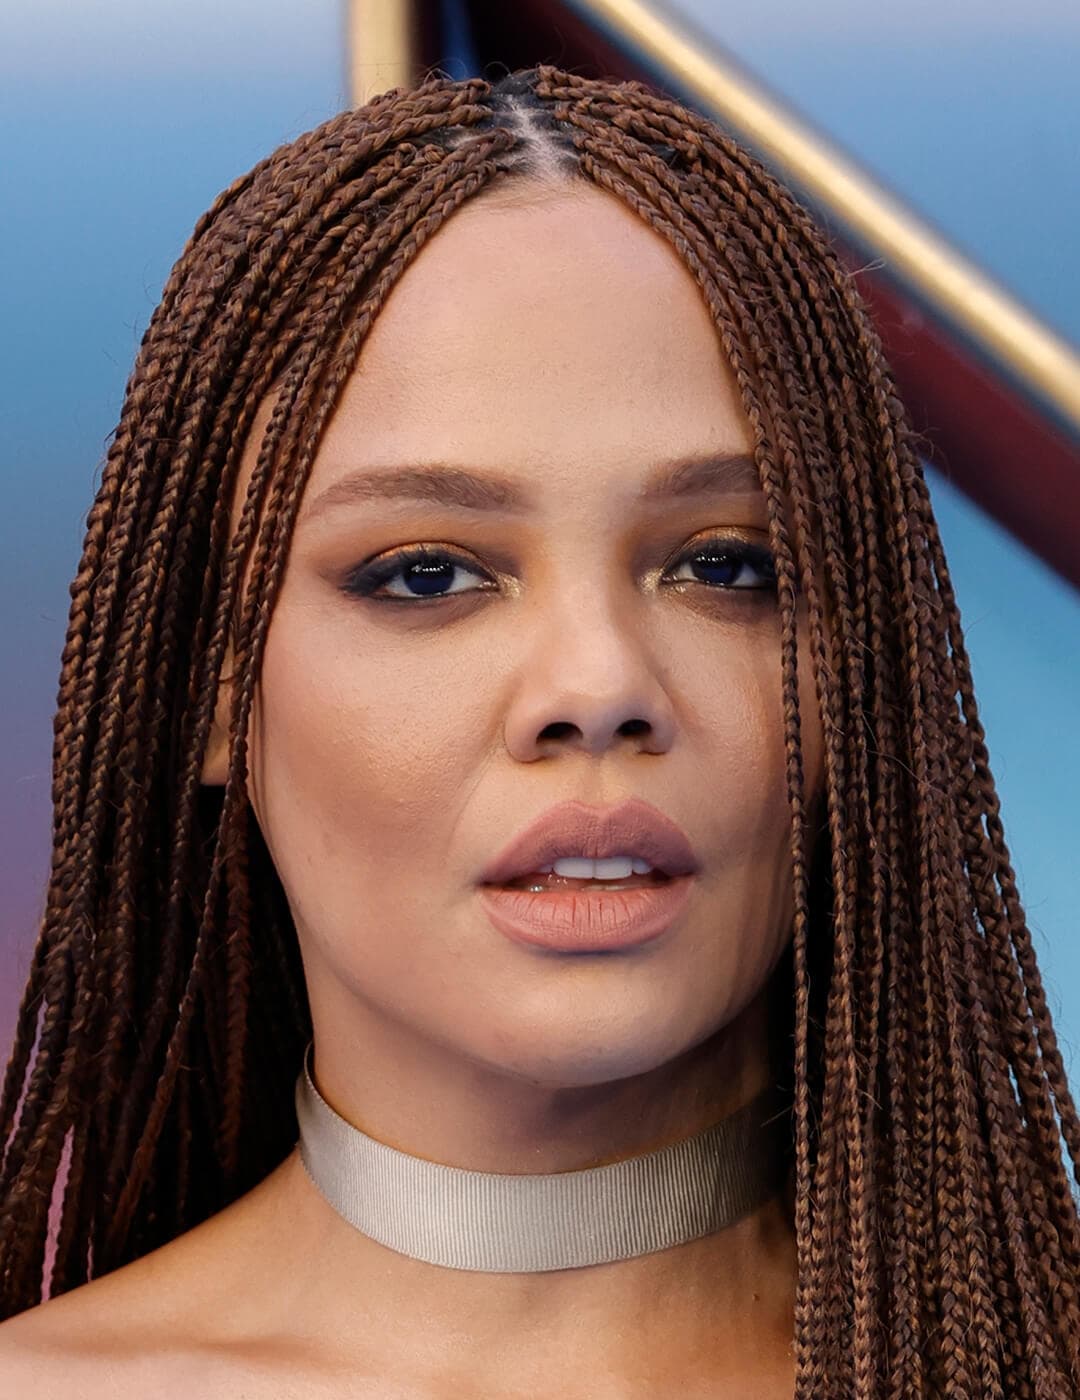 An image of Tessa Thompson wearing her braided brown hair and gold eye shadow